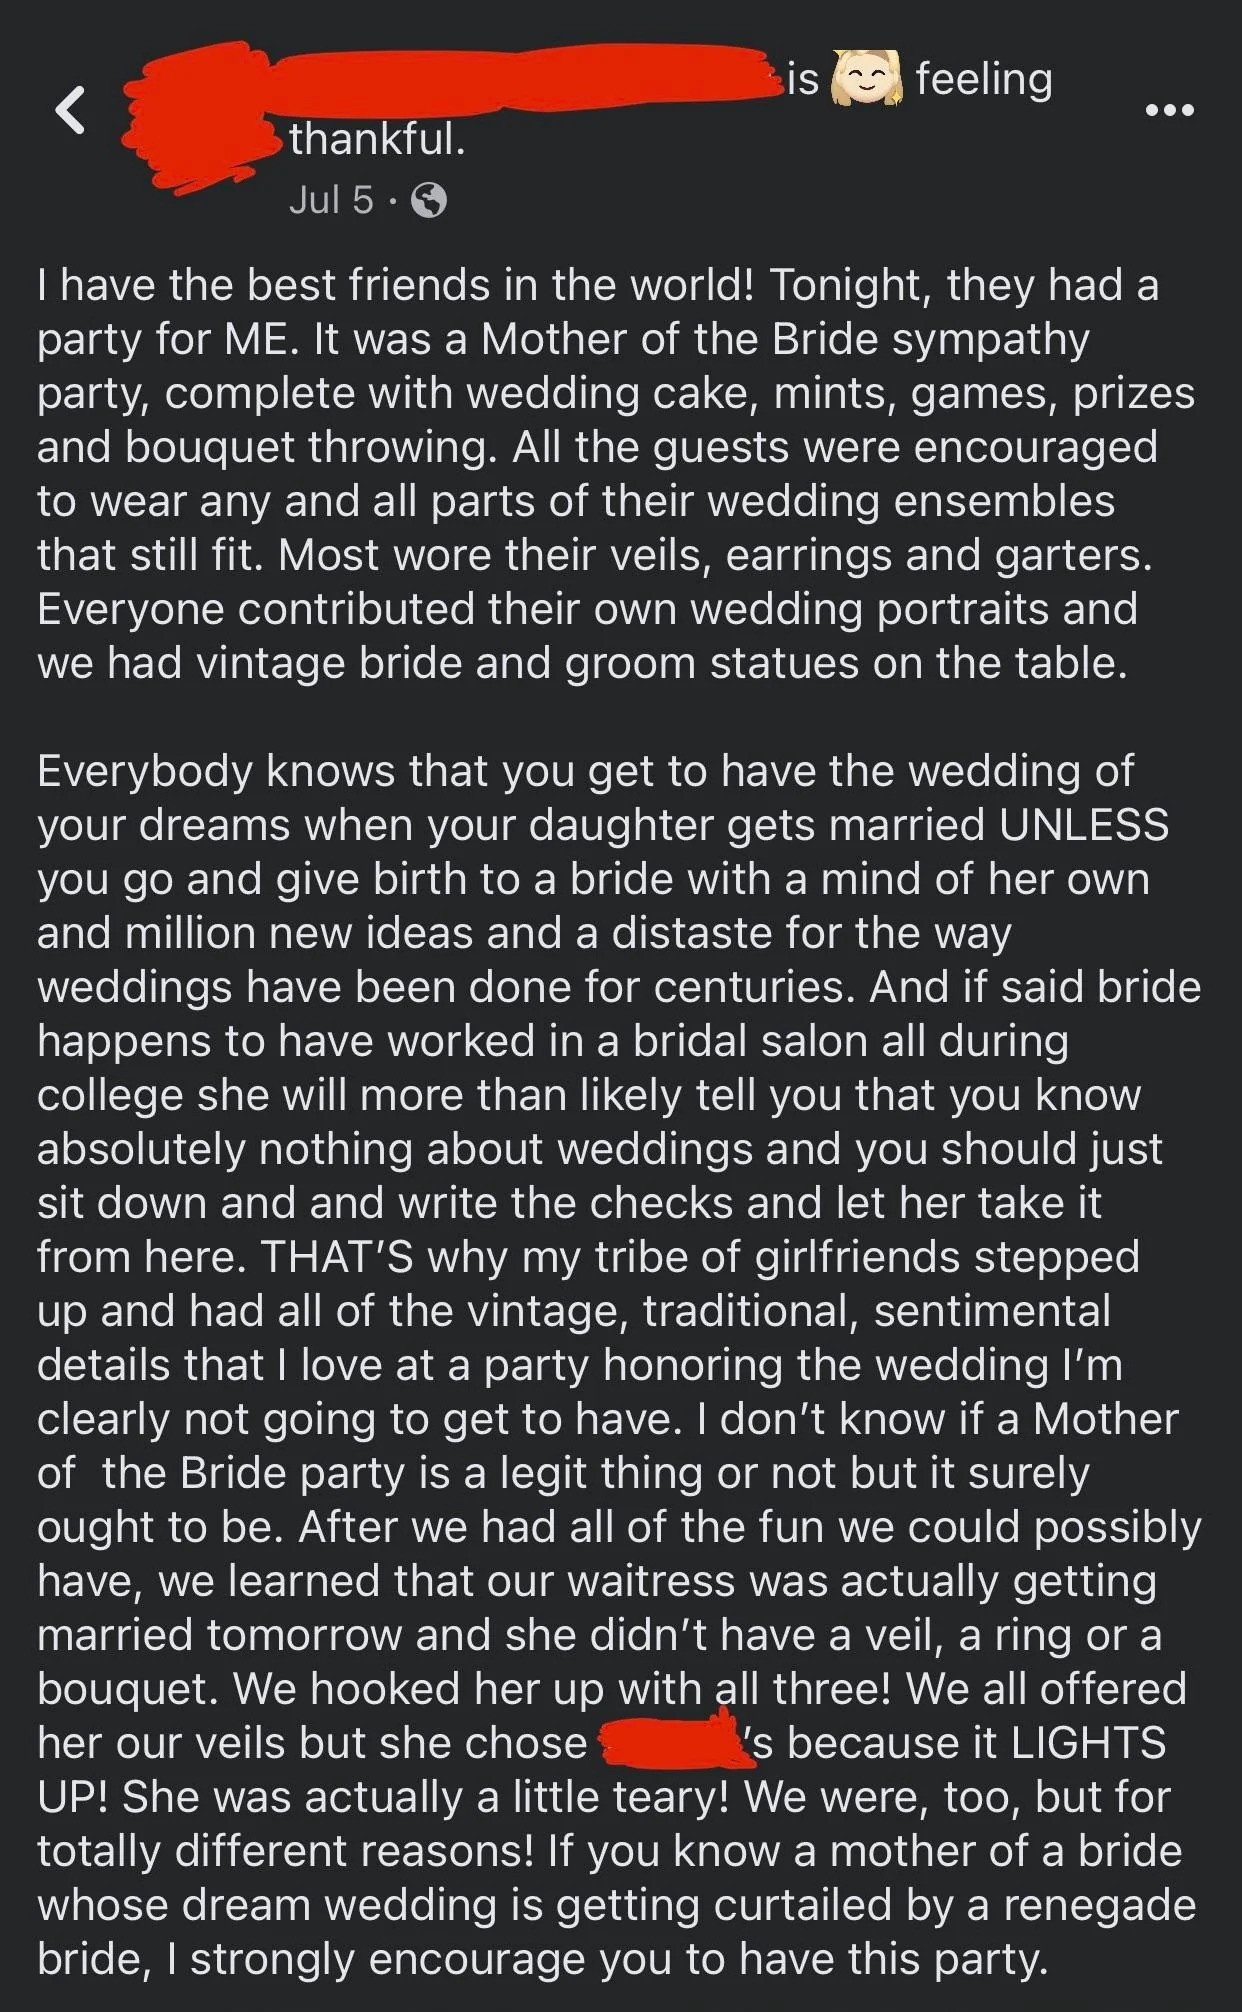 The image is a screenshot of a social media post with a text expressing gratitude for friends who threw a wedding-themed party after the author&#x27;s wedding was canceled